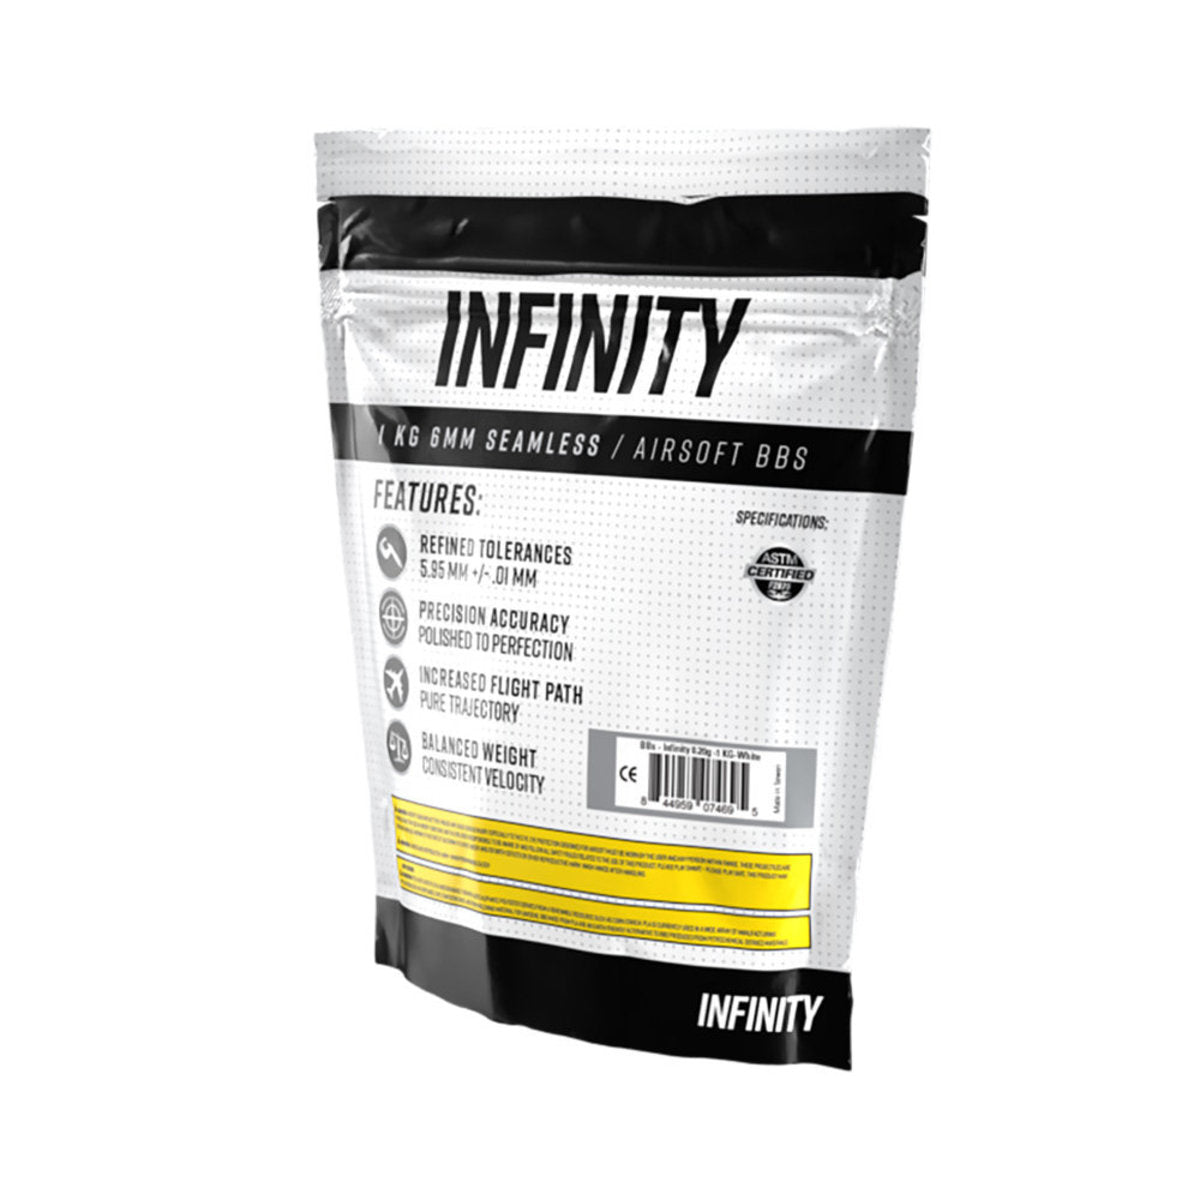 Infinity 0.25G 4,000Ct Biodegradable Airsoft Bbs (1Kg)